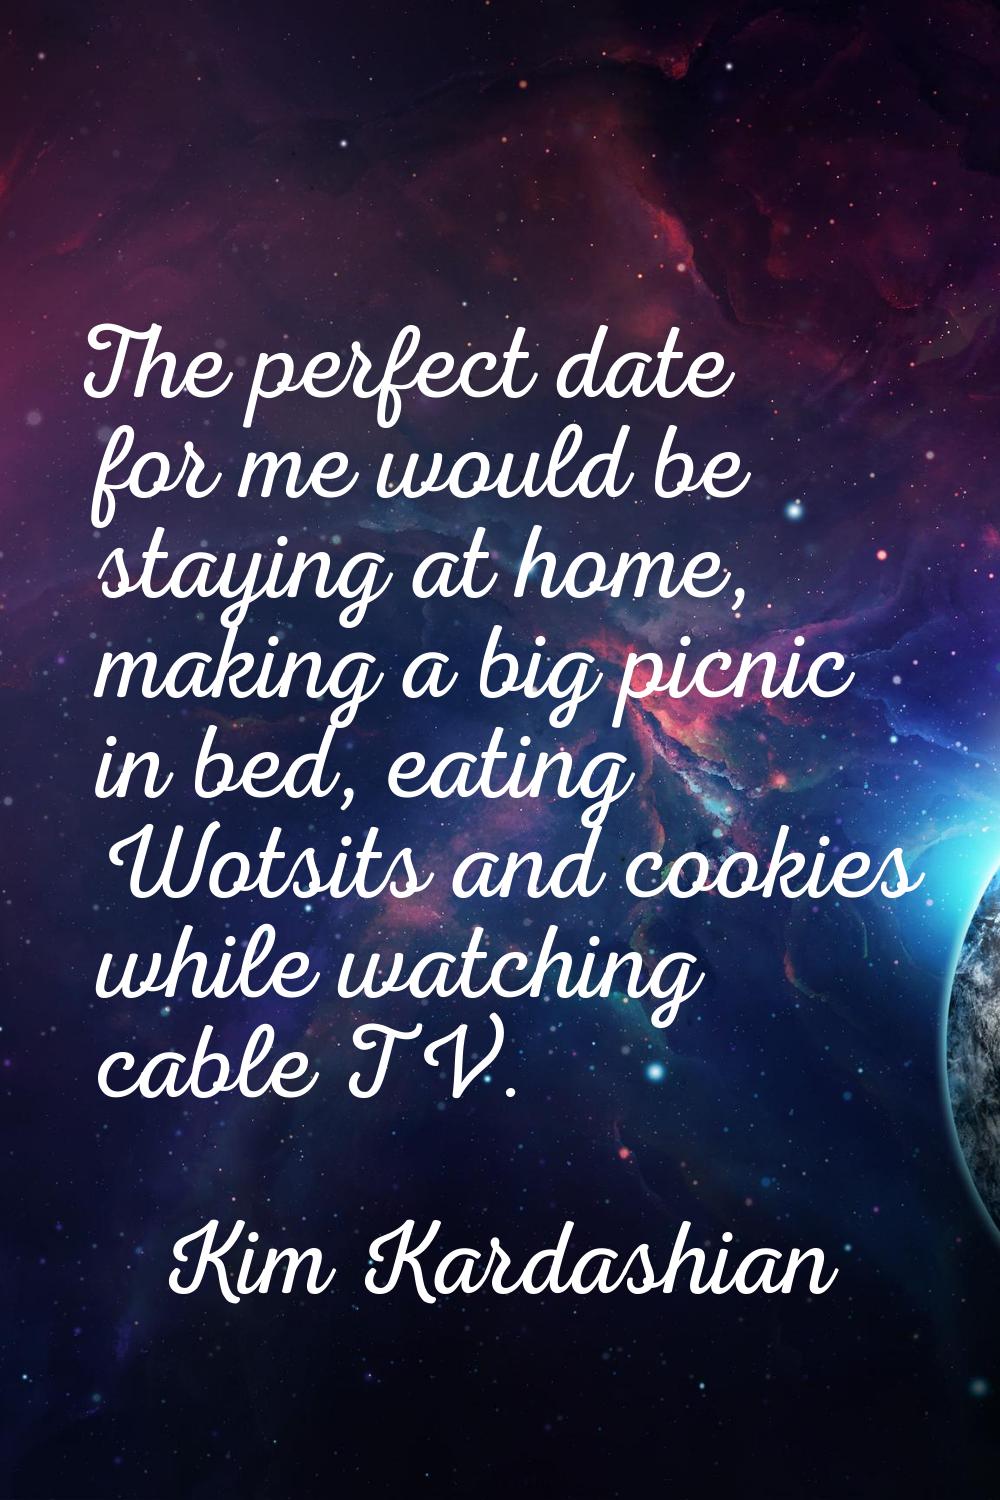 The perfect date for me would be staying at home, making a big picnic in bed, eating Wotsits and co